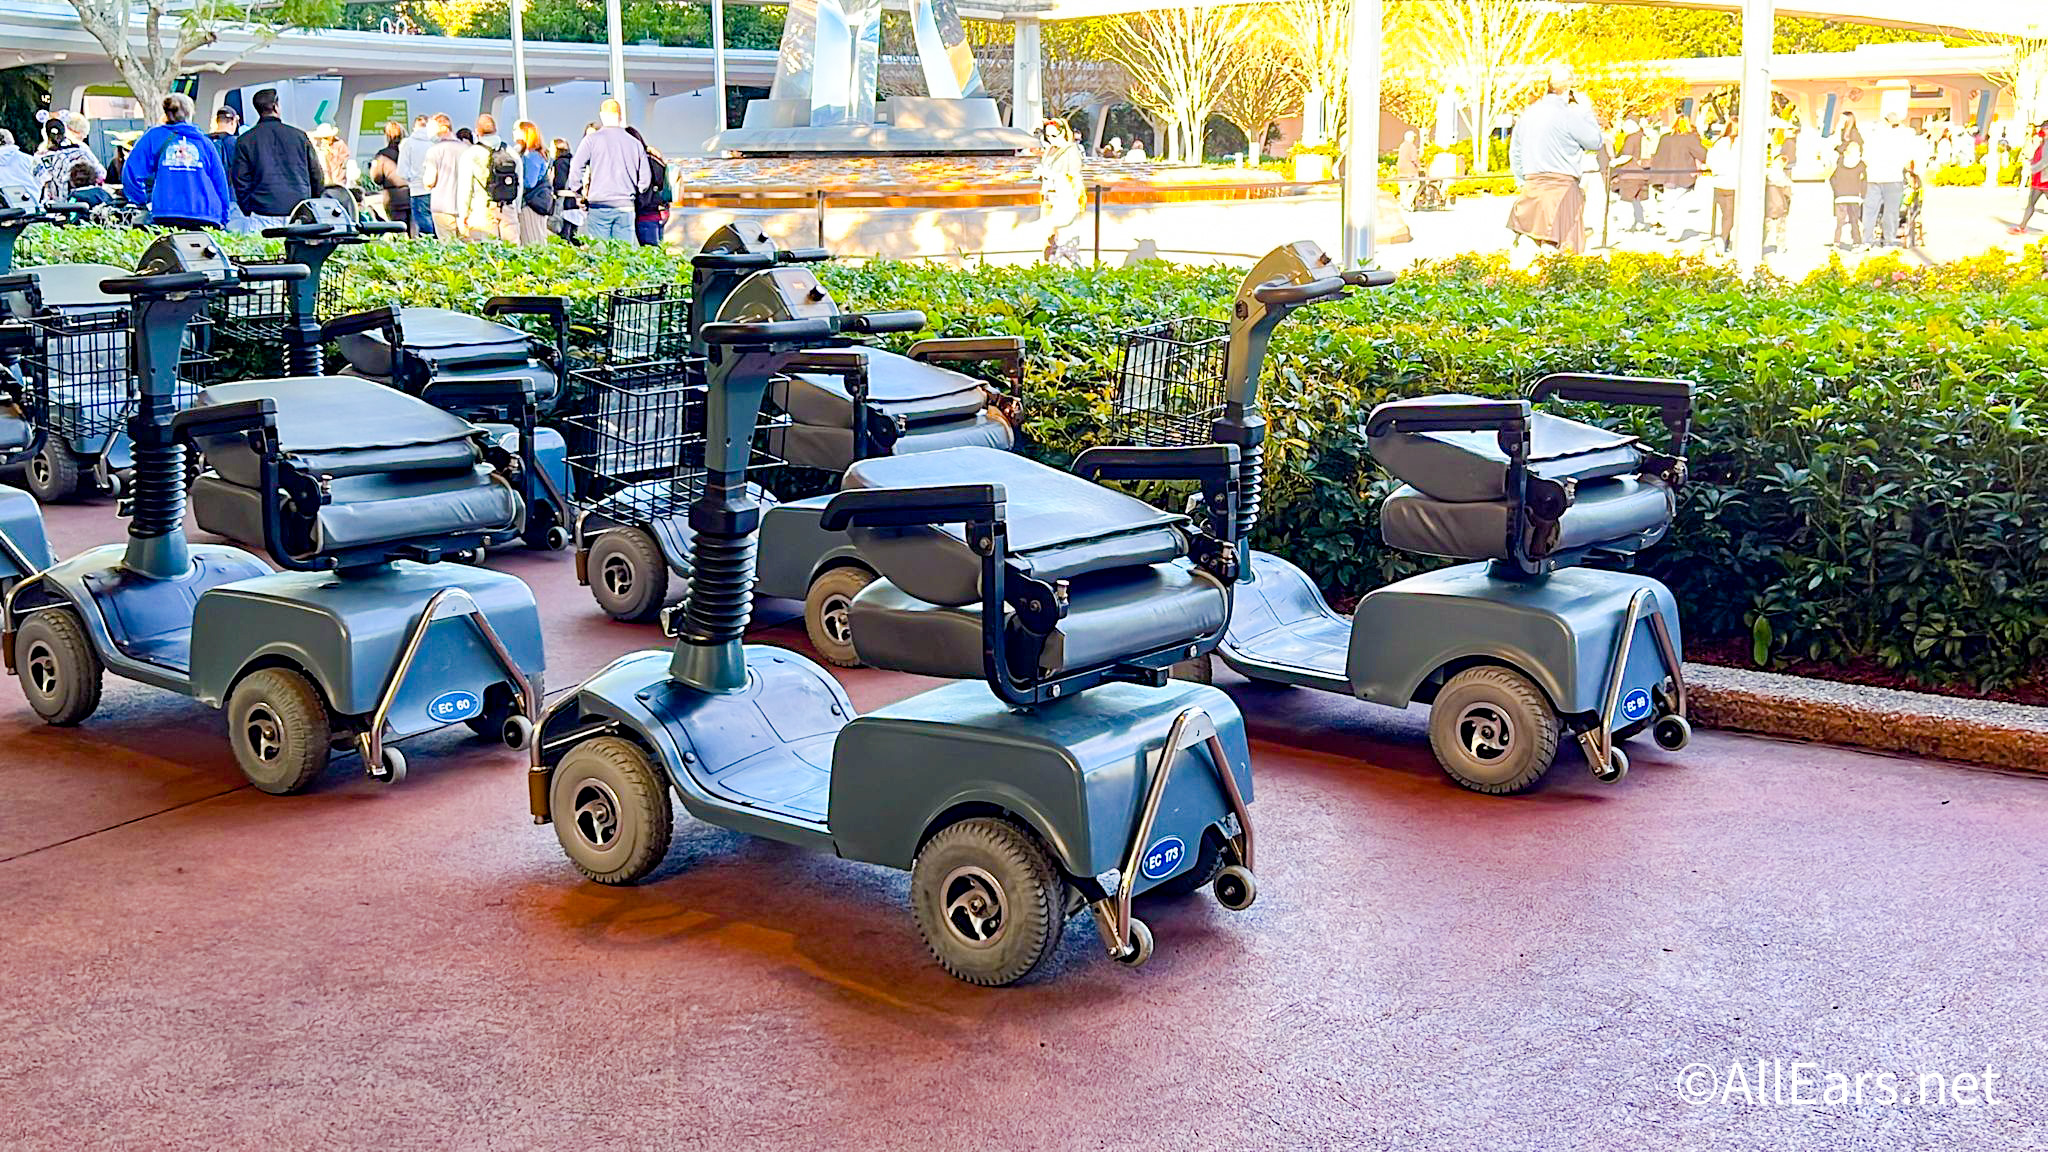 The Best ECV and Scooter Rentals In Disney World, Prices and Discounts -  AllEars.Net